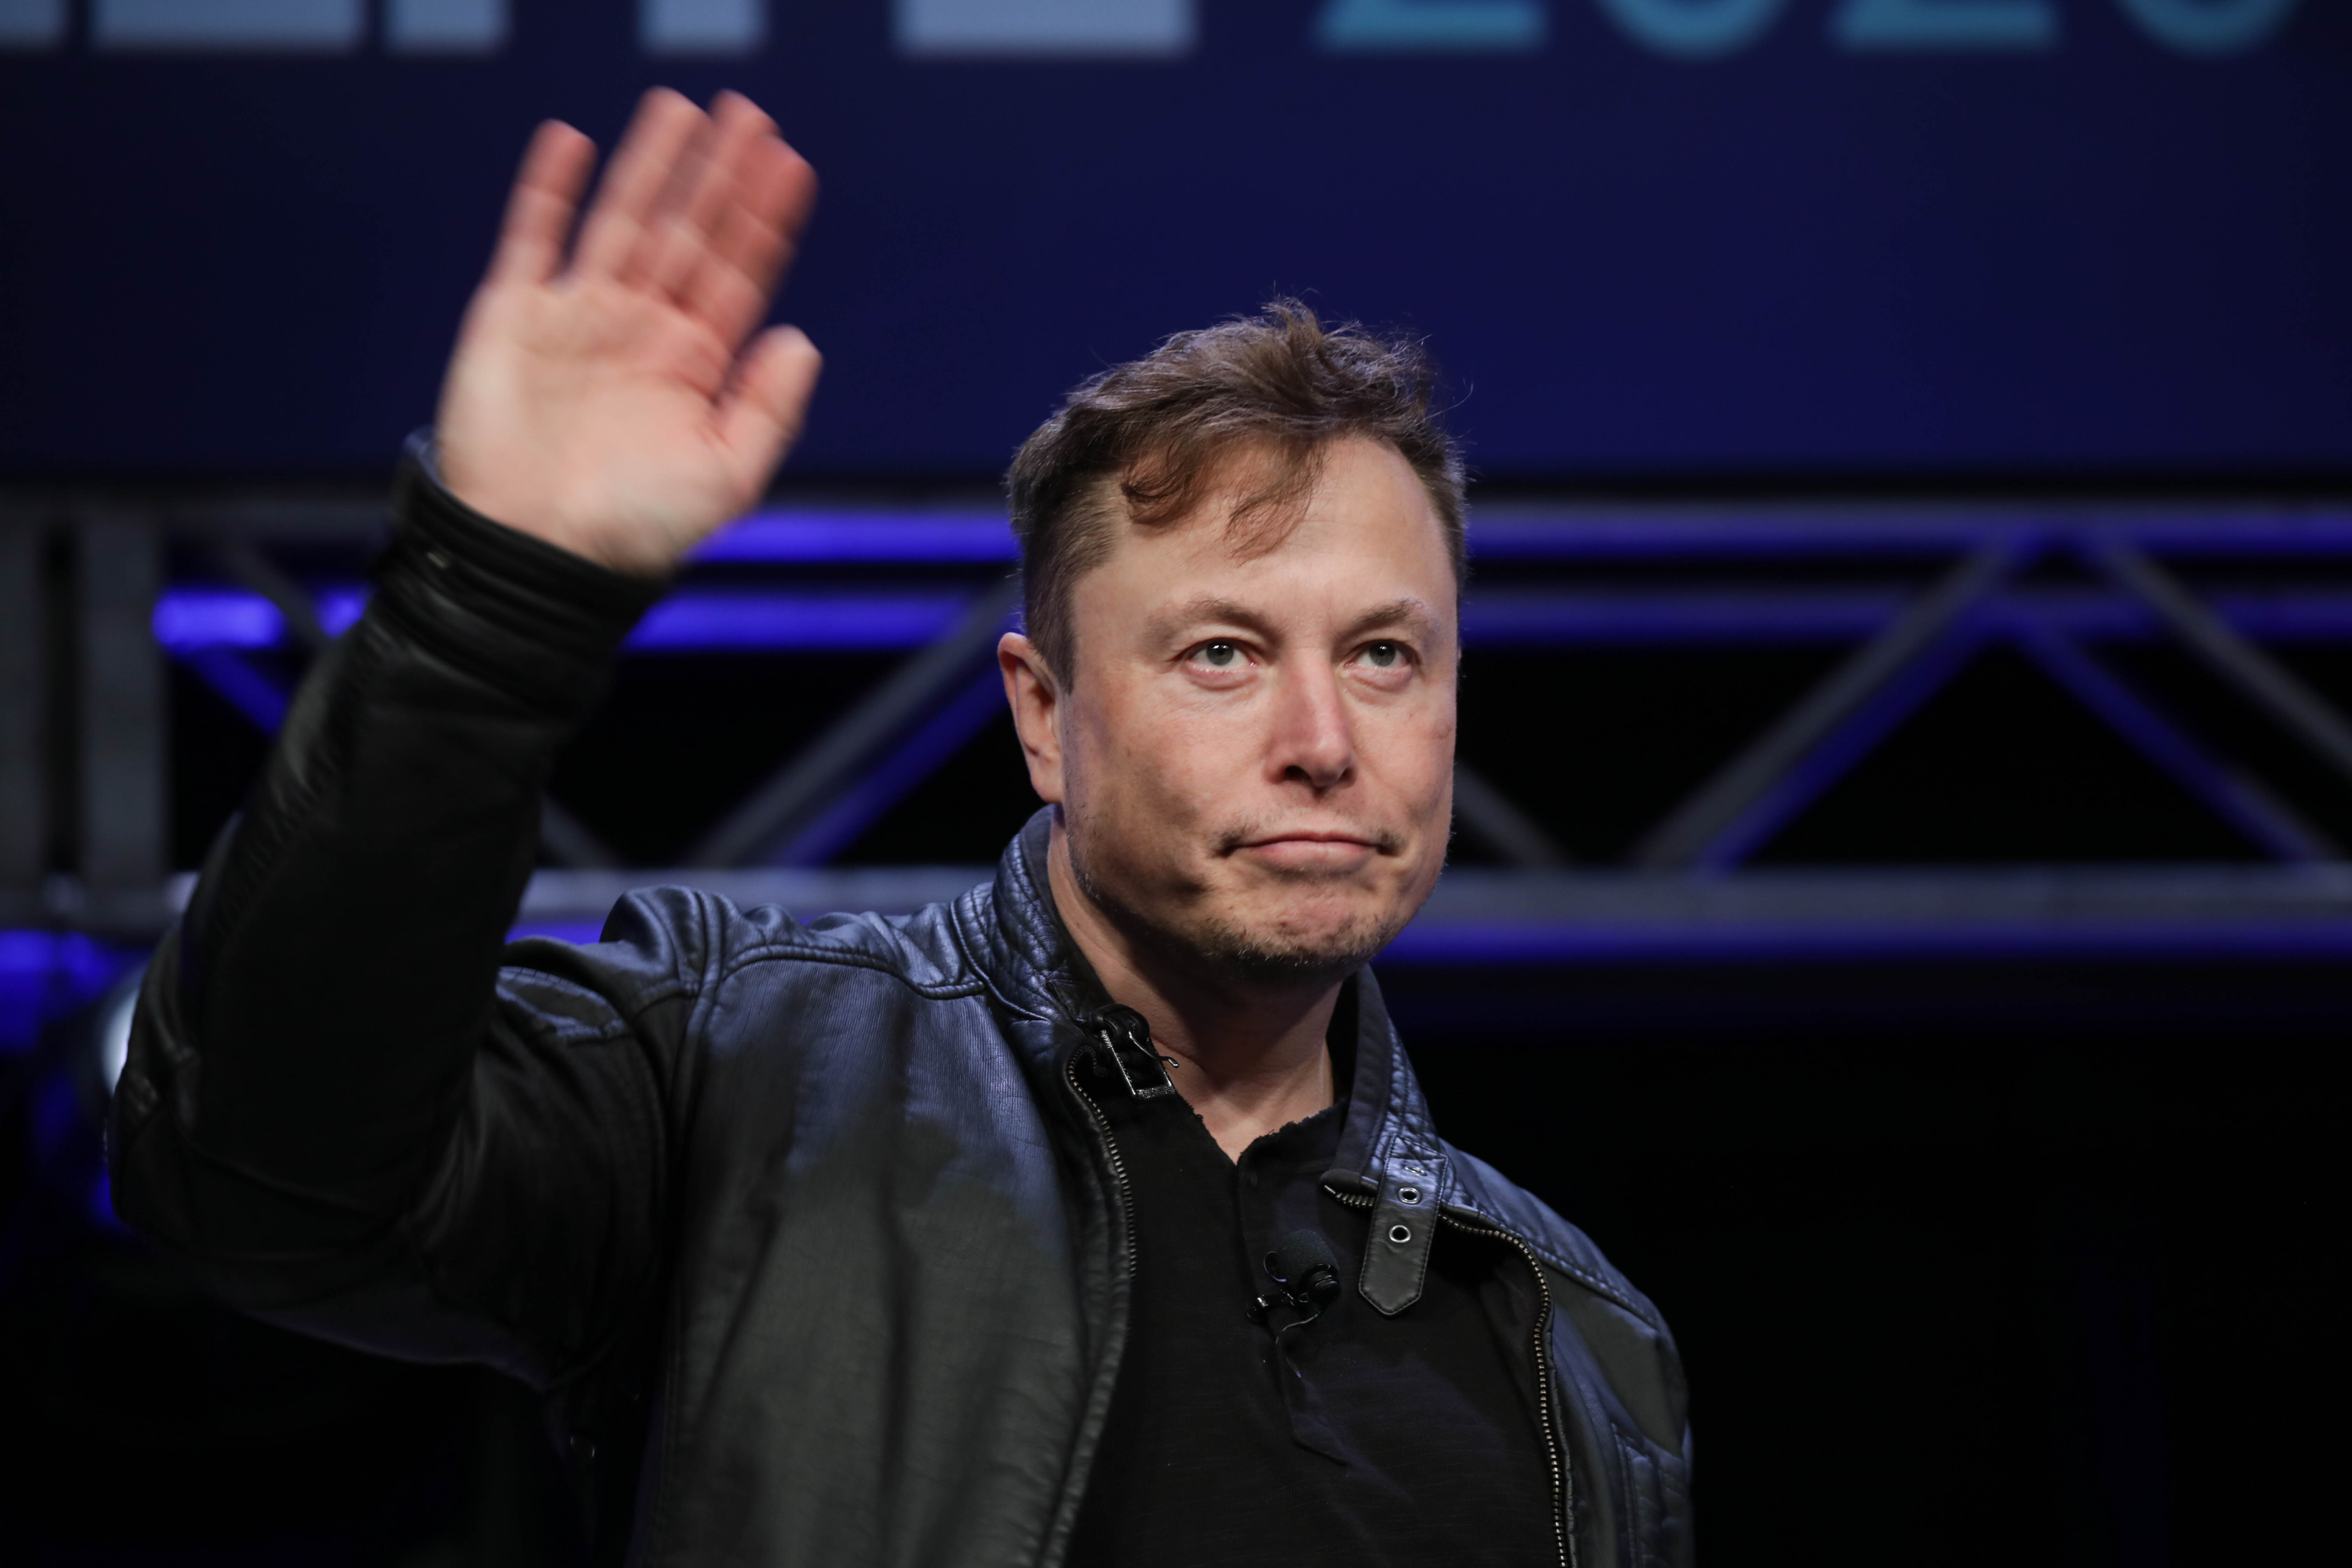 Elon Musk waves from a stage.